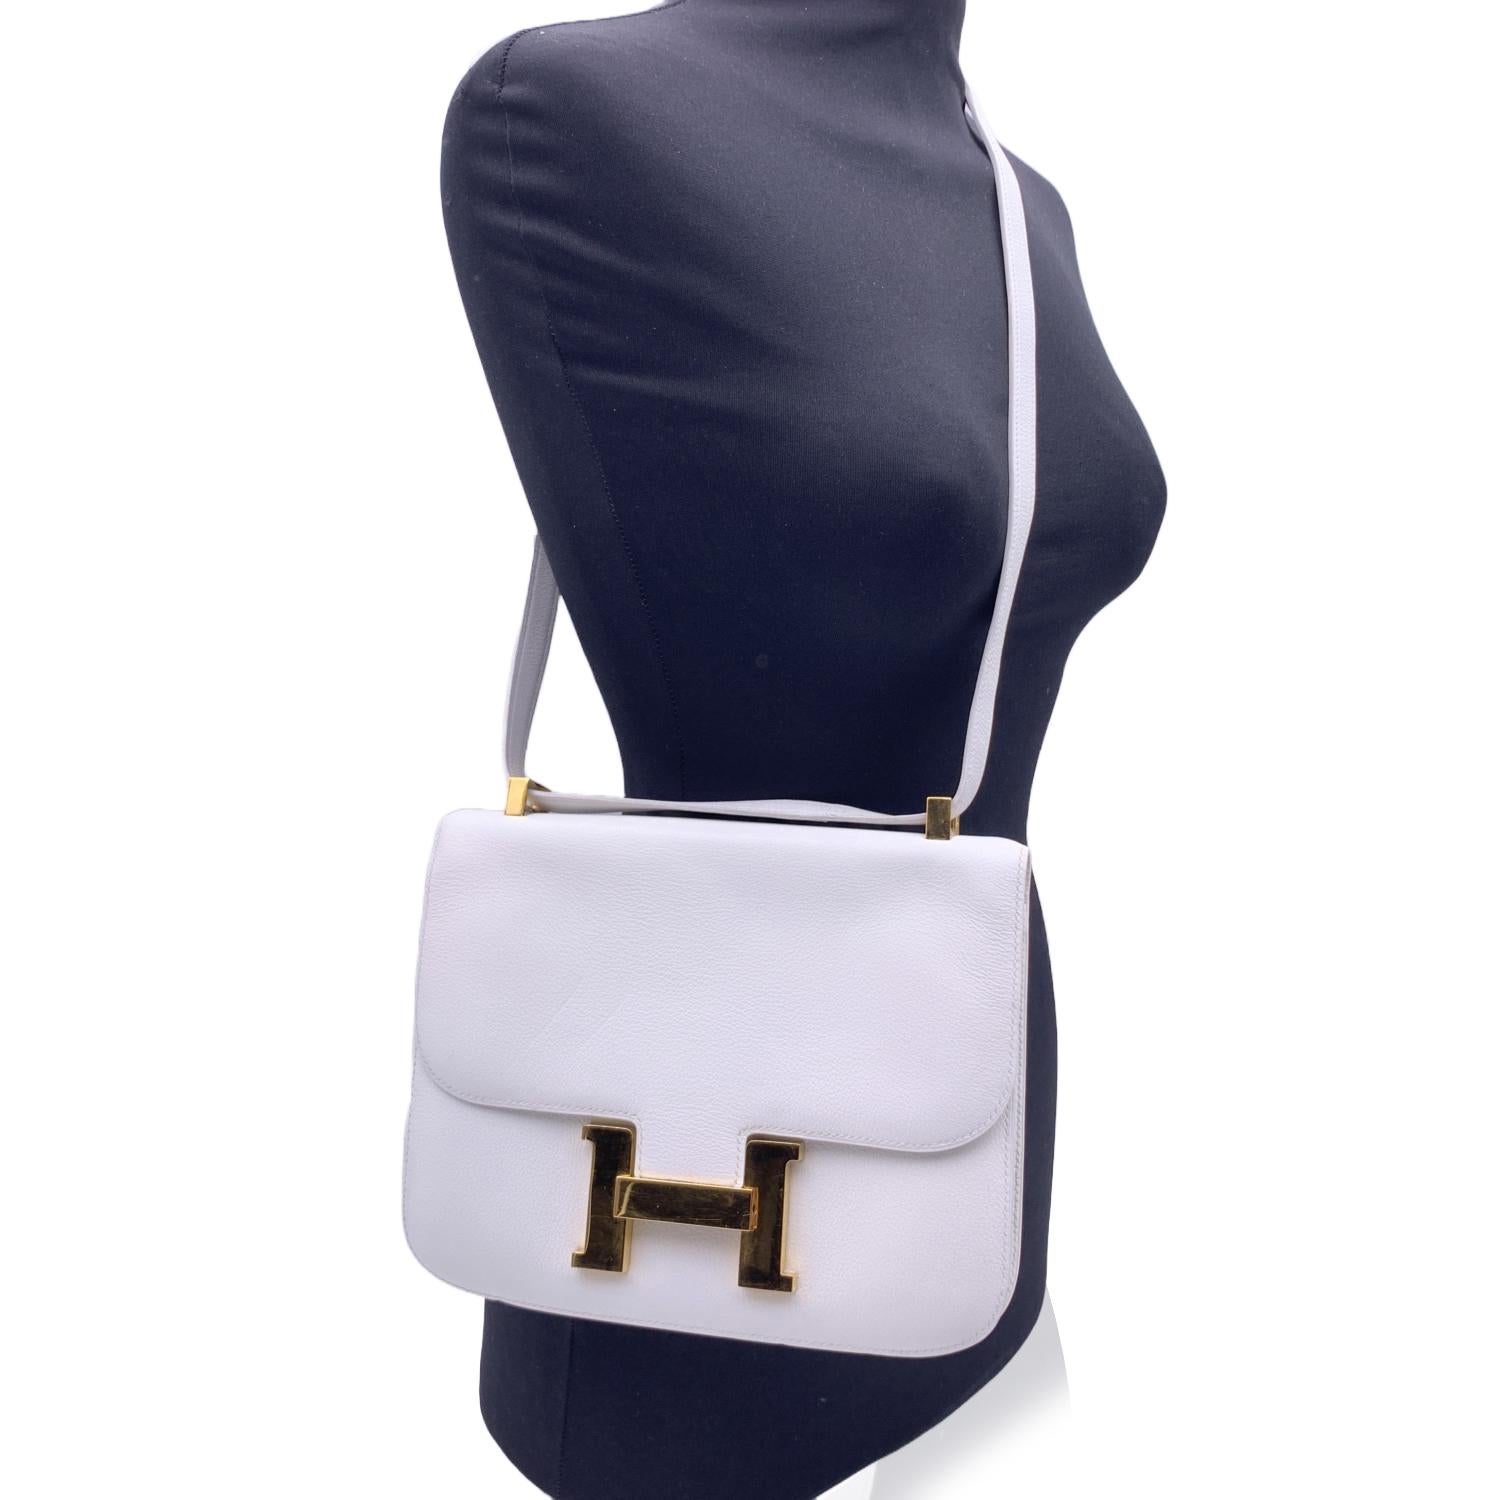 This beautiful Bag will come with a Certificate of Authenticity provided by Entrupy. The certificate will be provided at no further cost

Hermes Vintage Leather 'Constance' Shoulder Bag. This is a very iconic model by Hermes; legend has it that in